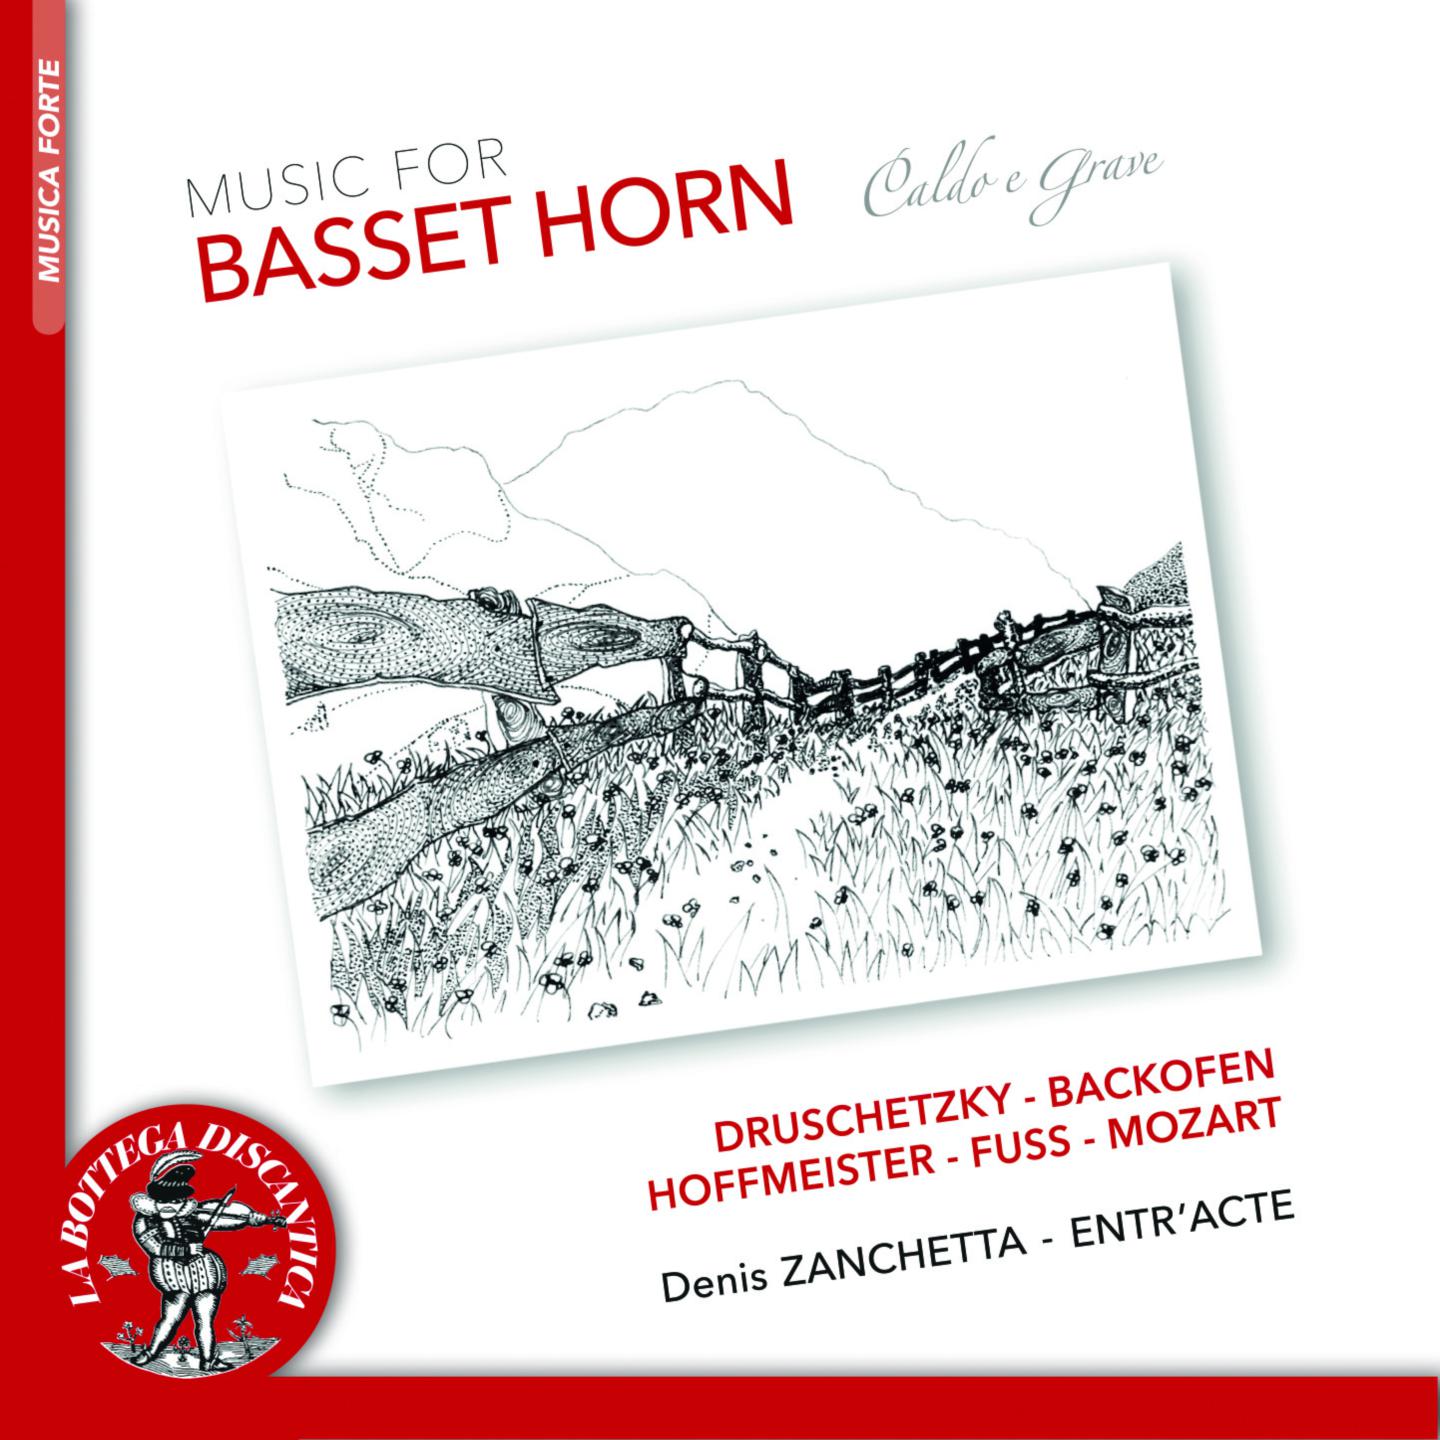 Quintet for Viola, Flute, Oboe, Basset Horn and Bassoon:II. Menuetto